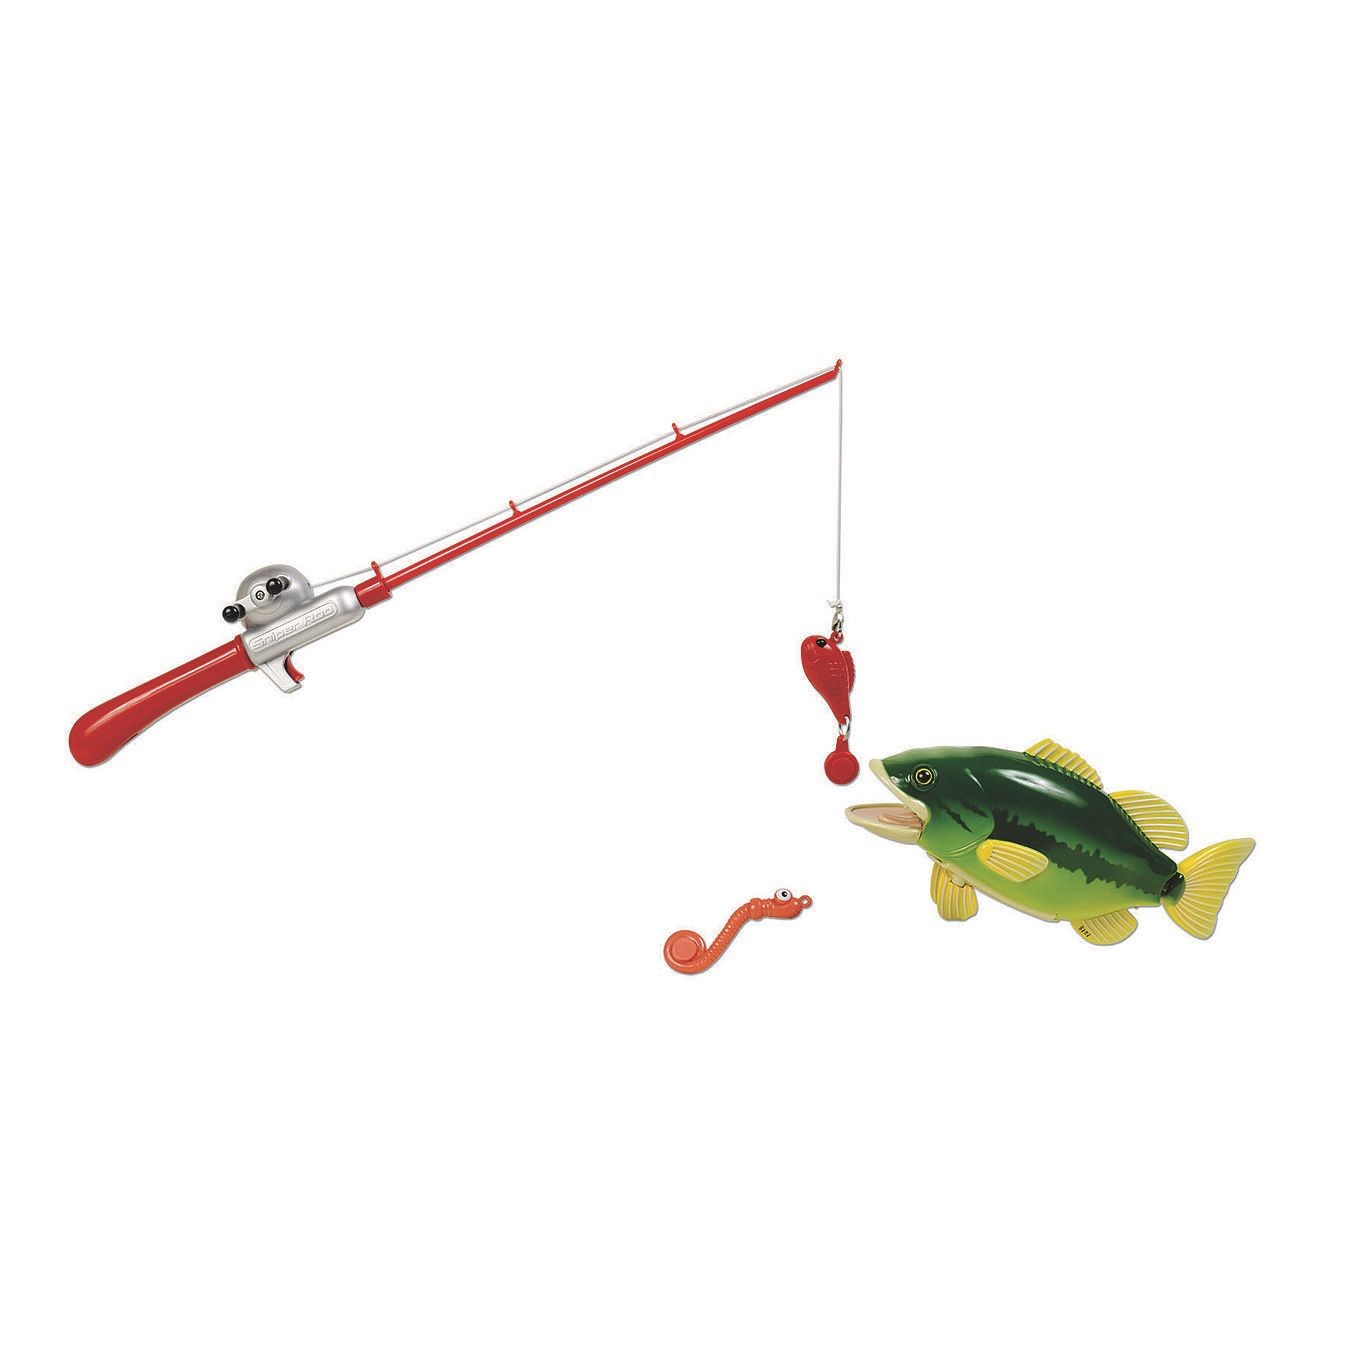 Buy Catch of the Day Real Action Fishing Toy at S&S Worldwide